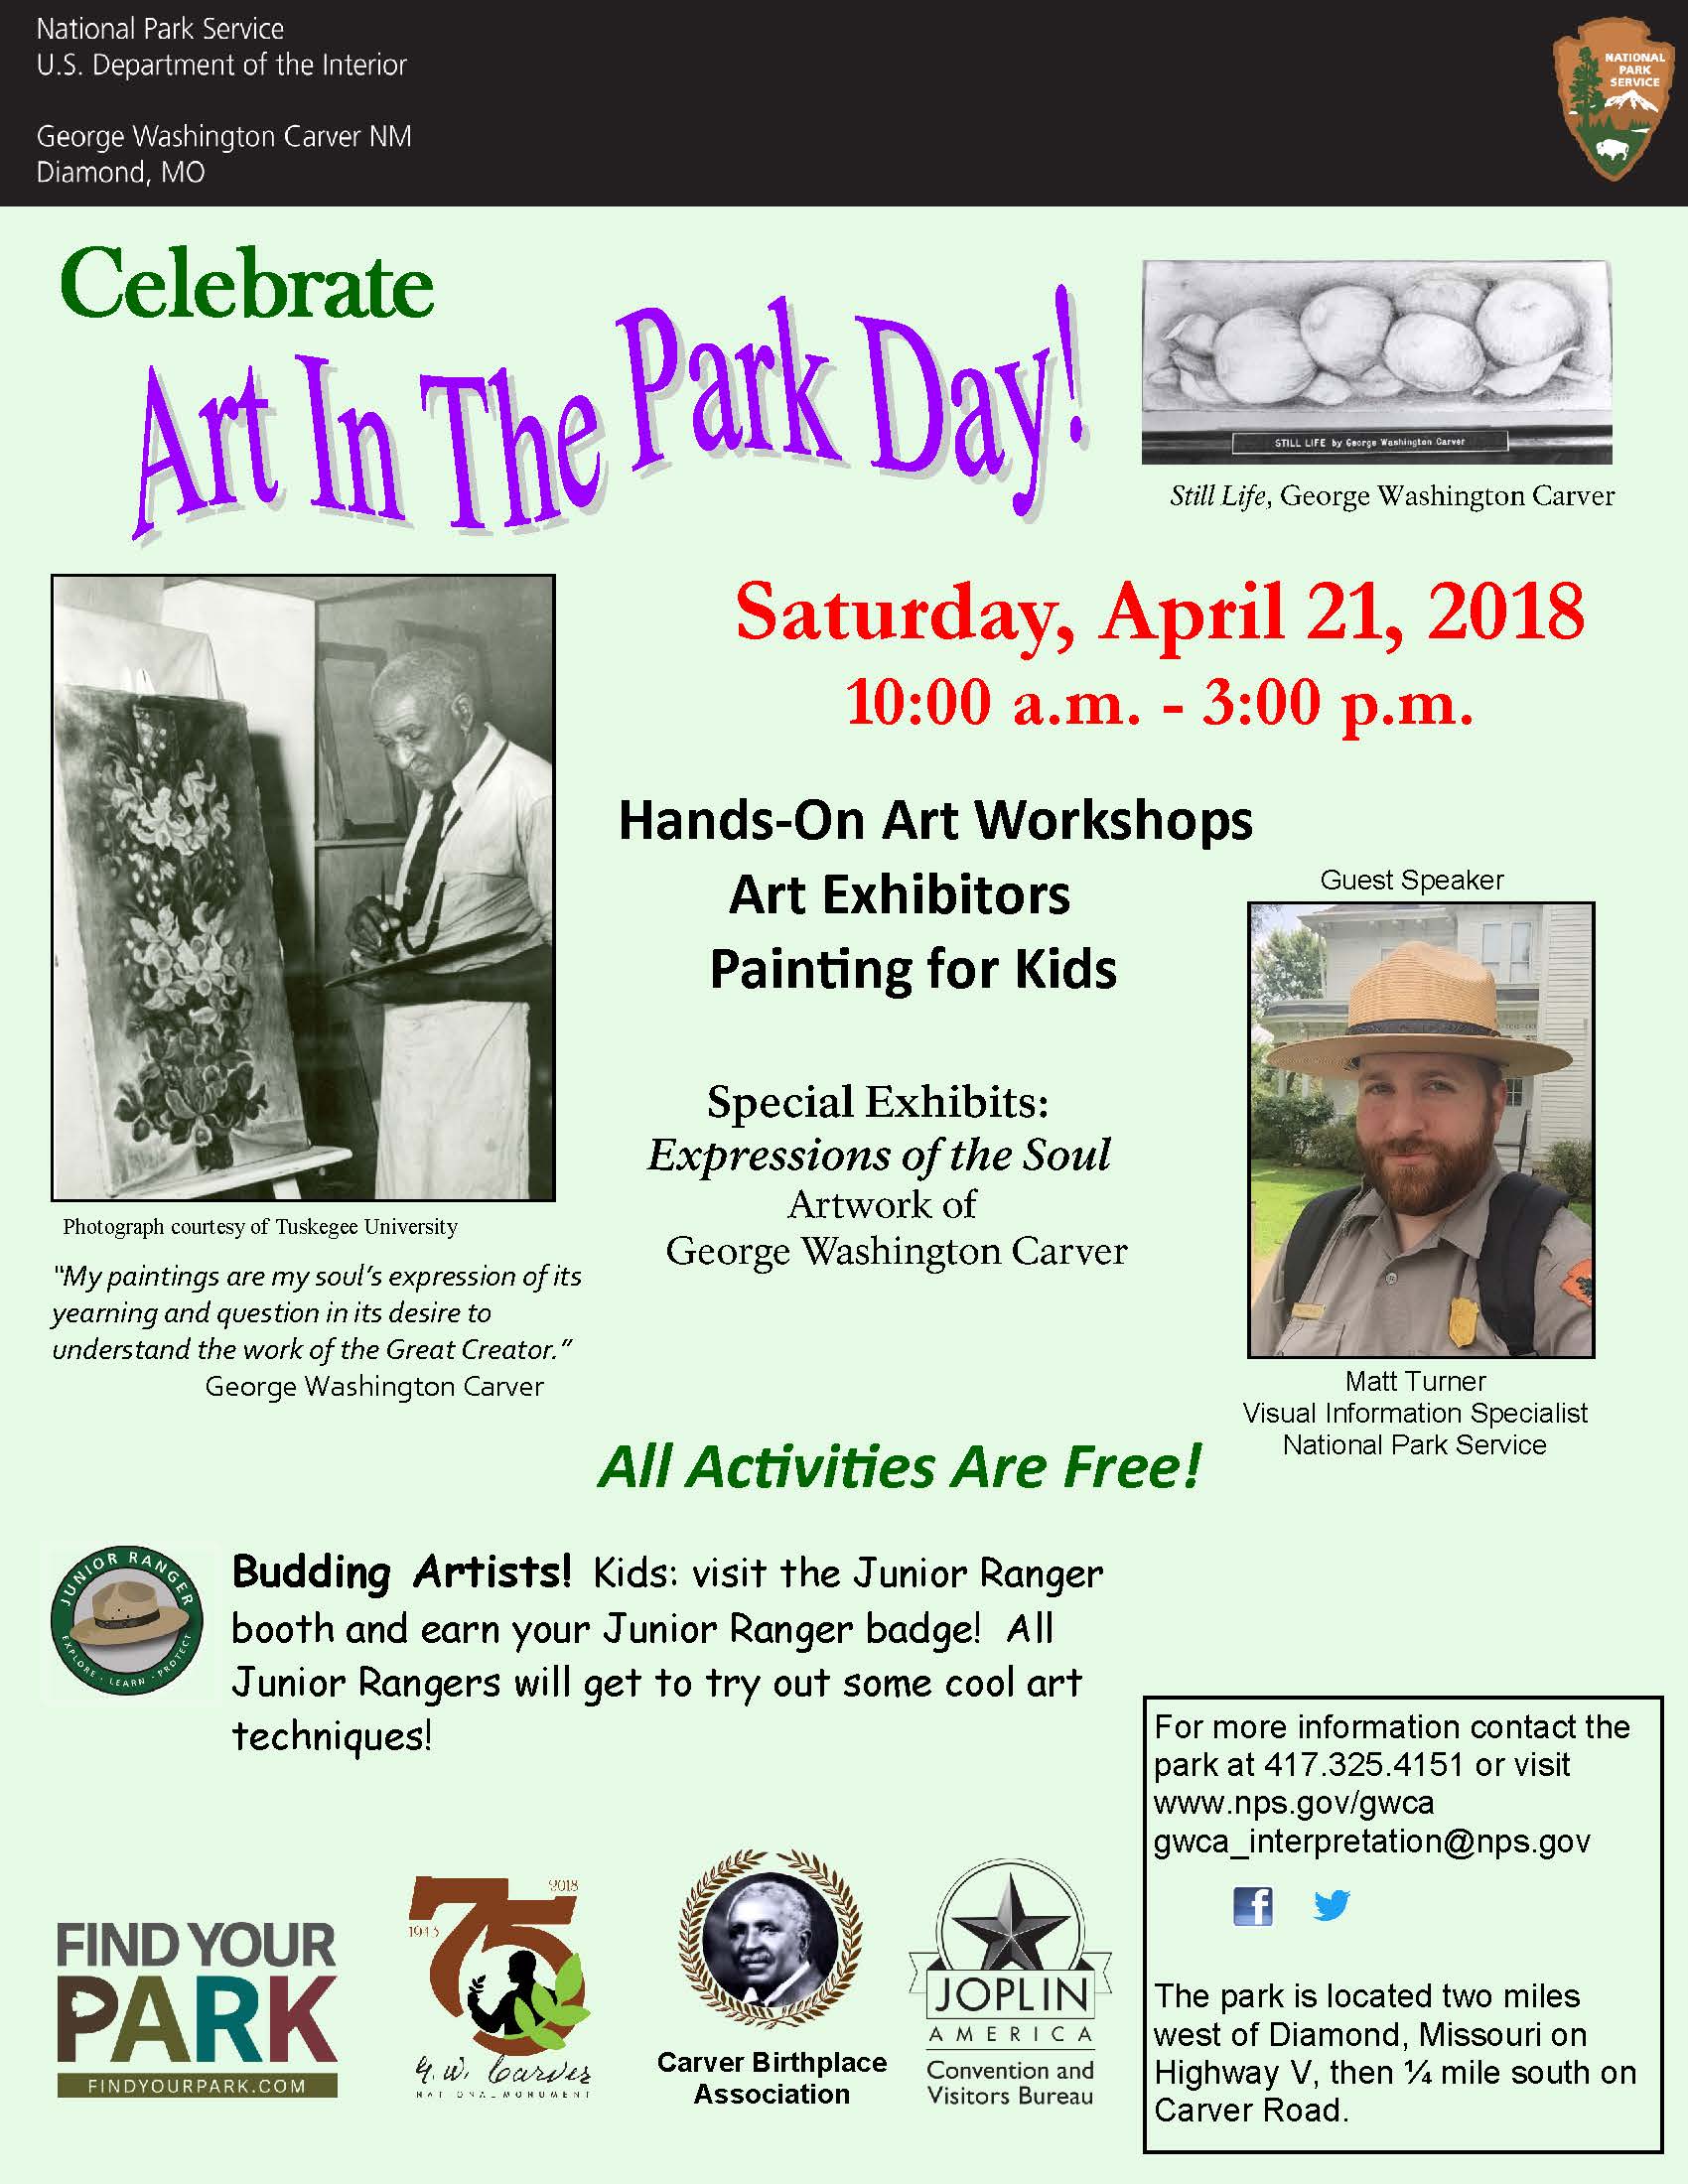 The photograph is for an upcoming park special event: Art in the Park. The poster includes several images and text about the event.